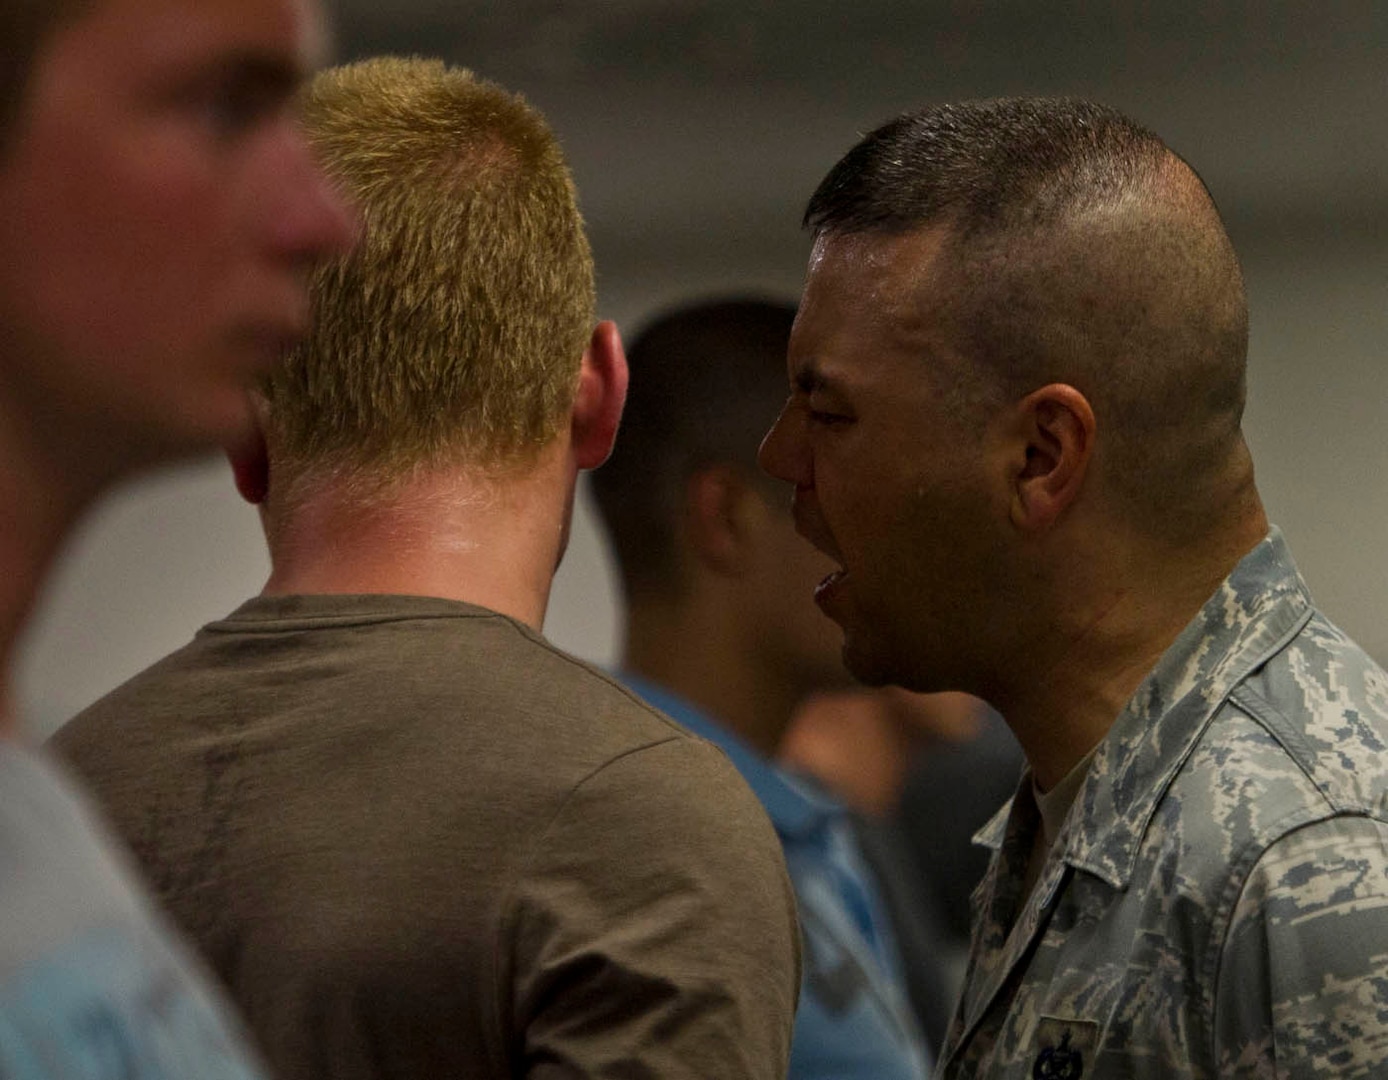 Tech. Sgt. Trevor Tiernan, 321st Training Squadron military training instructor, corrects a trainee Aug. 2 during the first few minutes of zero week at Lackland Air Force Base. (U.S. Air Force photo/Staff Sgt. Araceli Alarcon)